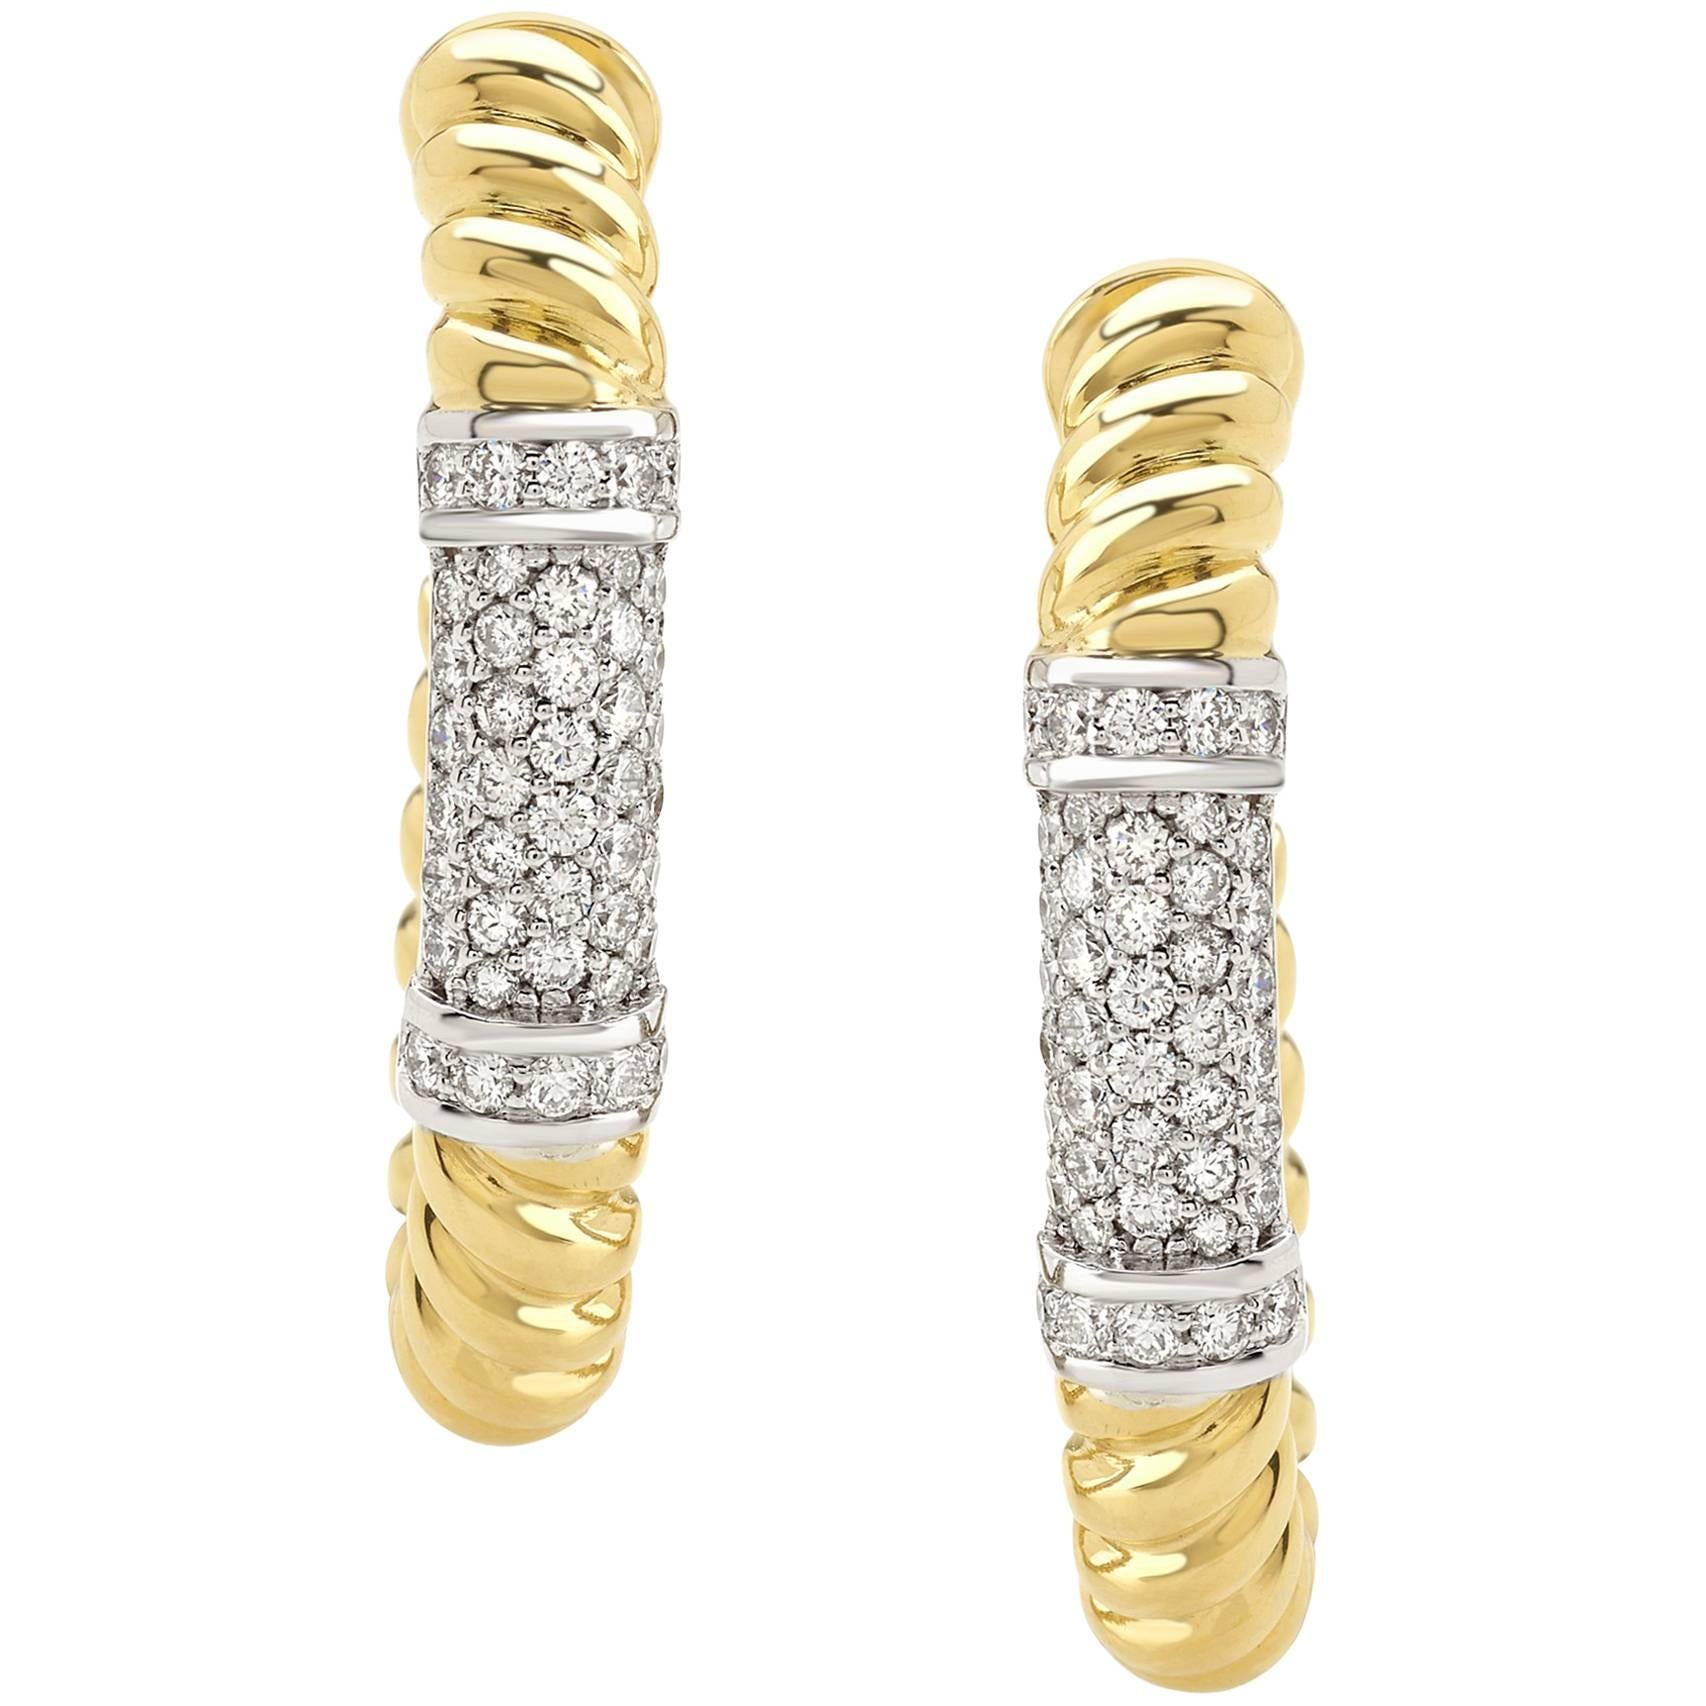 Pair of Earrings from the Collection "Rope" 18 Karat Yellow Gold and Diamonds